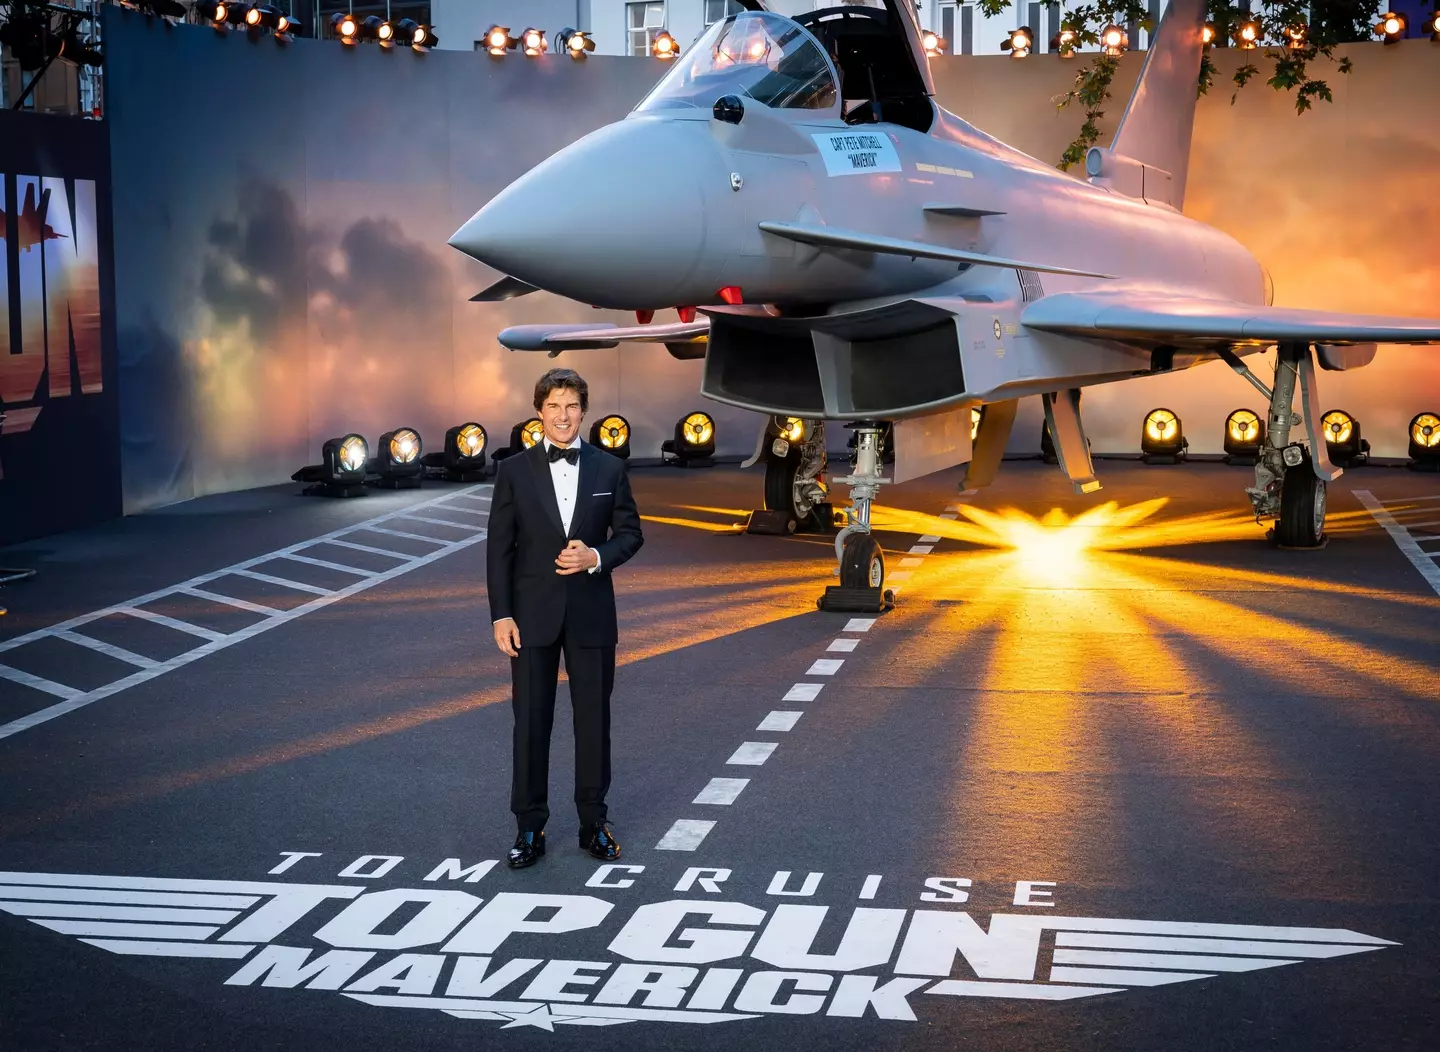 Tom Cruise stands in front of a fighter jet as he attends the Royal performance of Top Gun: Maverick.